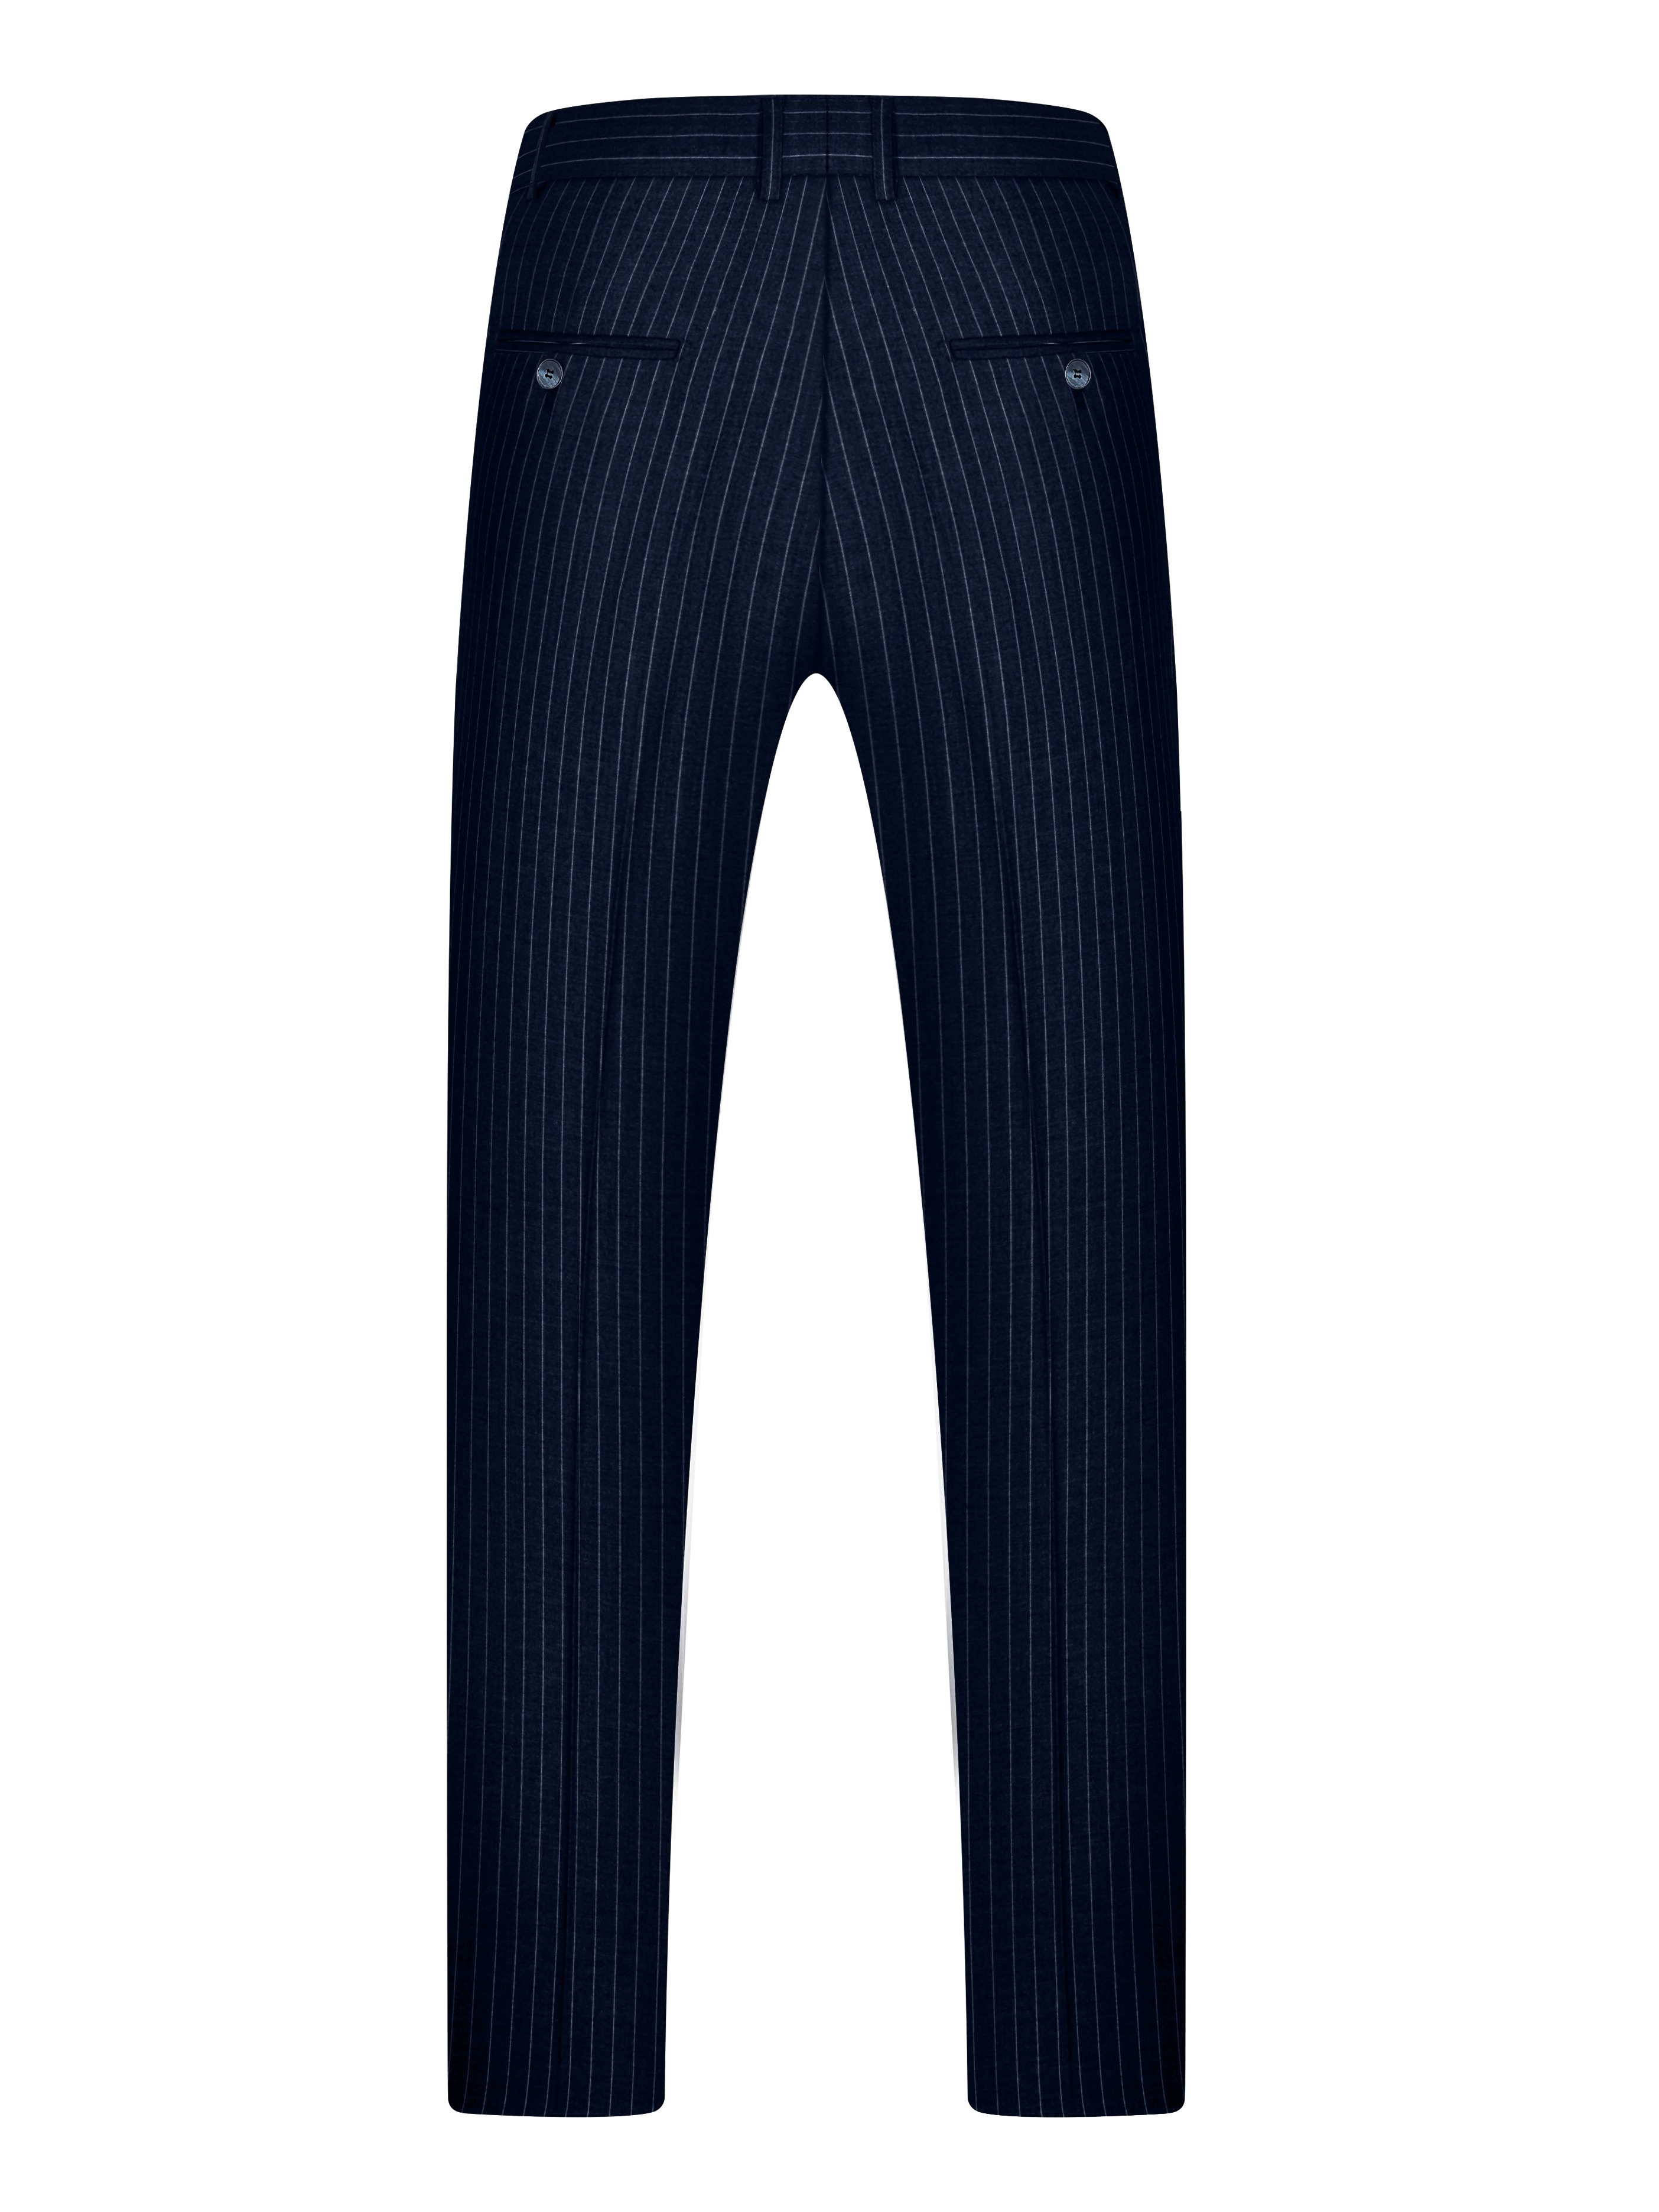 Navy Blue Slim Fit Mens Pinstripe Suit For Business, Prom, Wedding